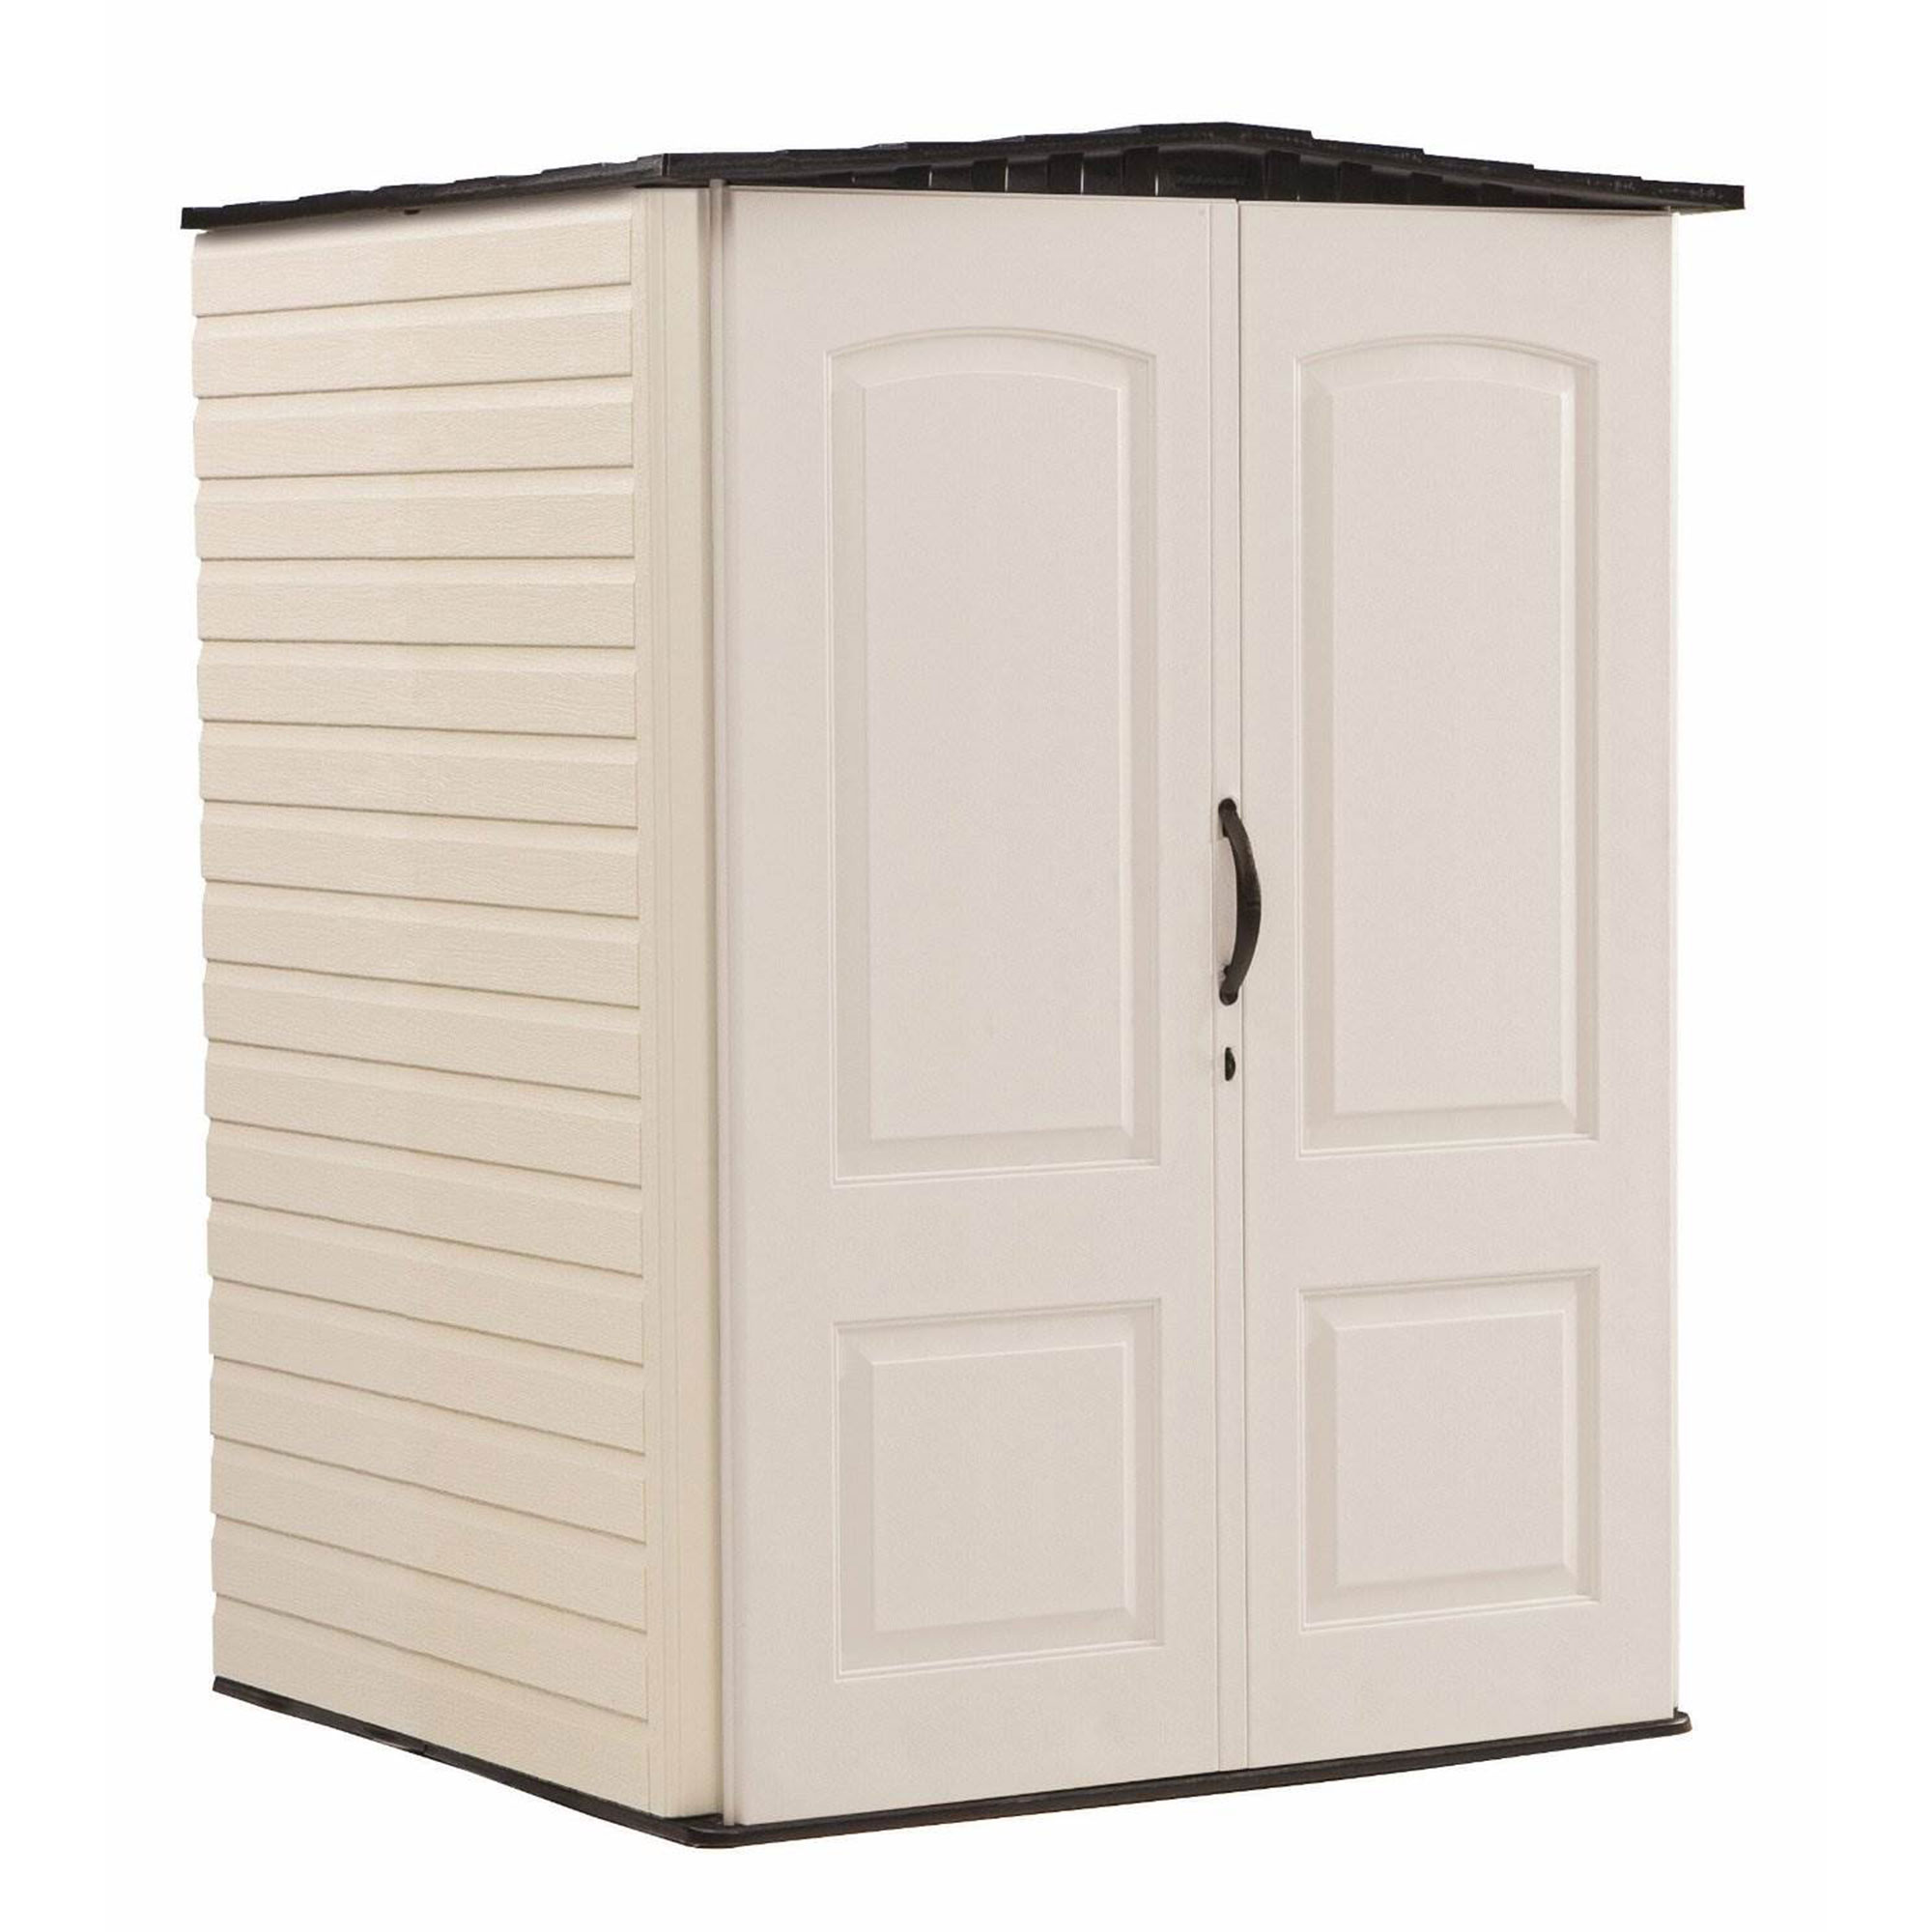 Rubbermaid Outdoor Medium Vertical Storage Shed, Resin, Beige, 72" H x 53.2" W x  57" L - image 1 of 4